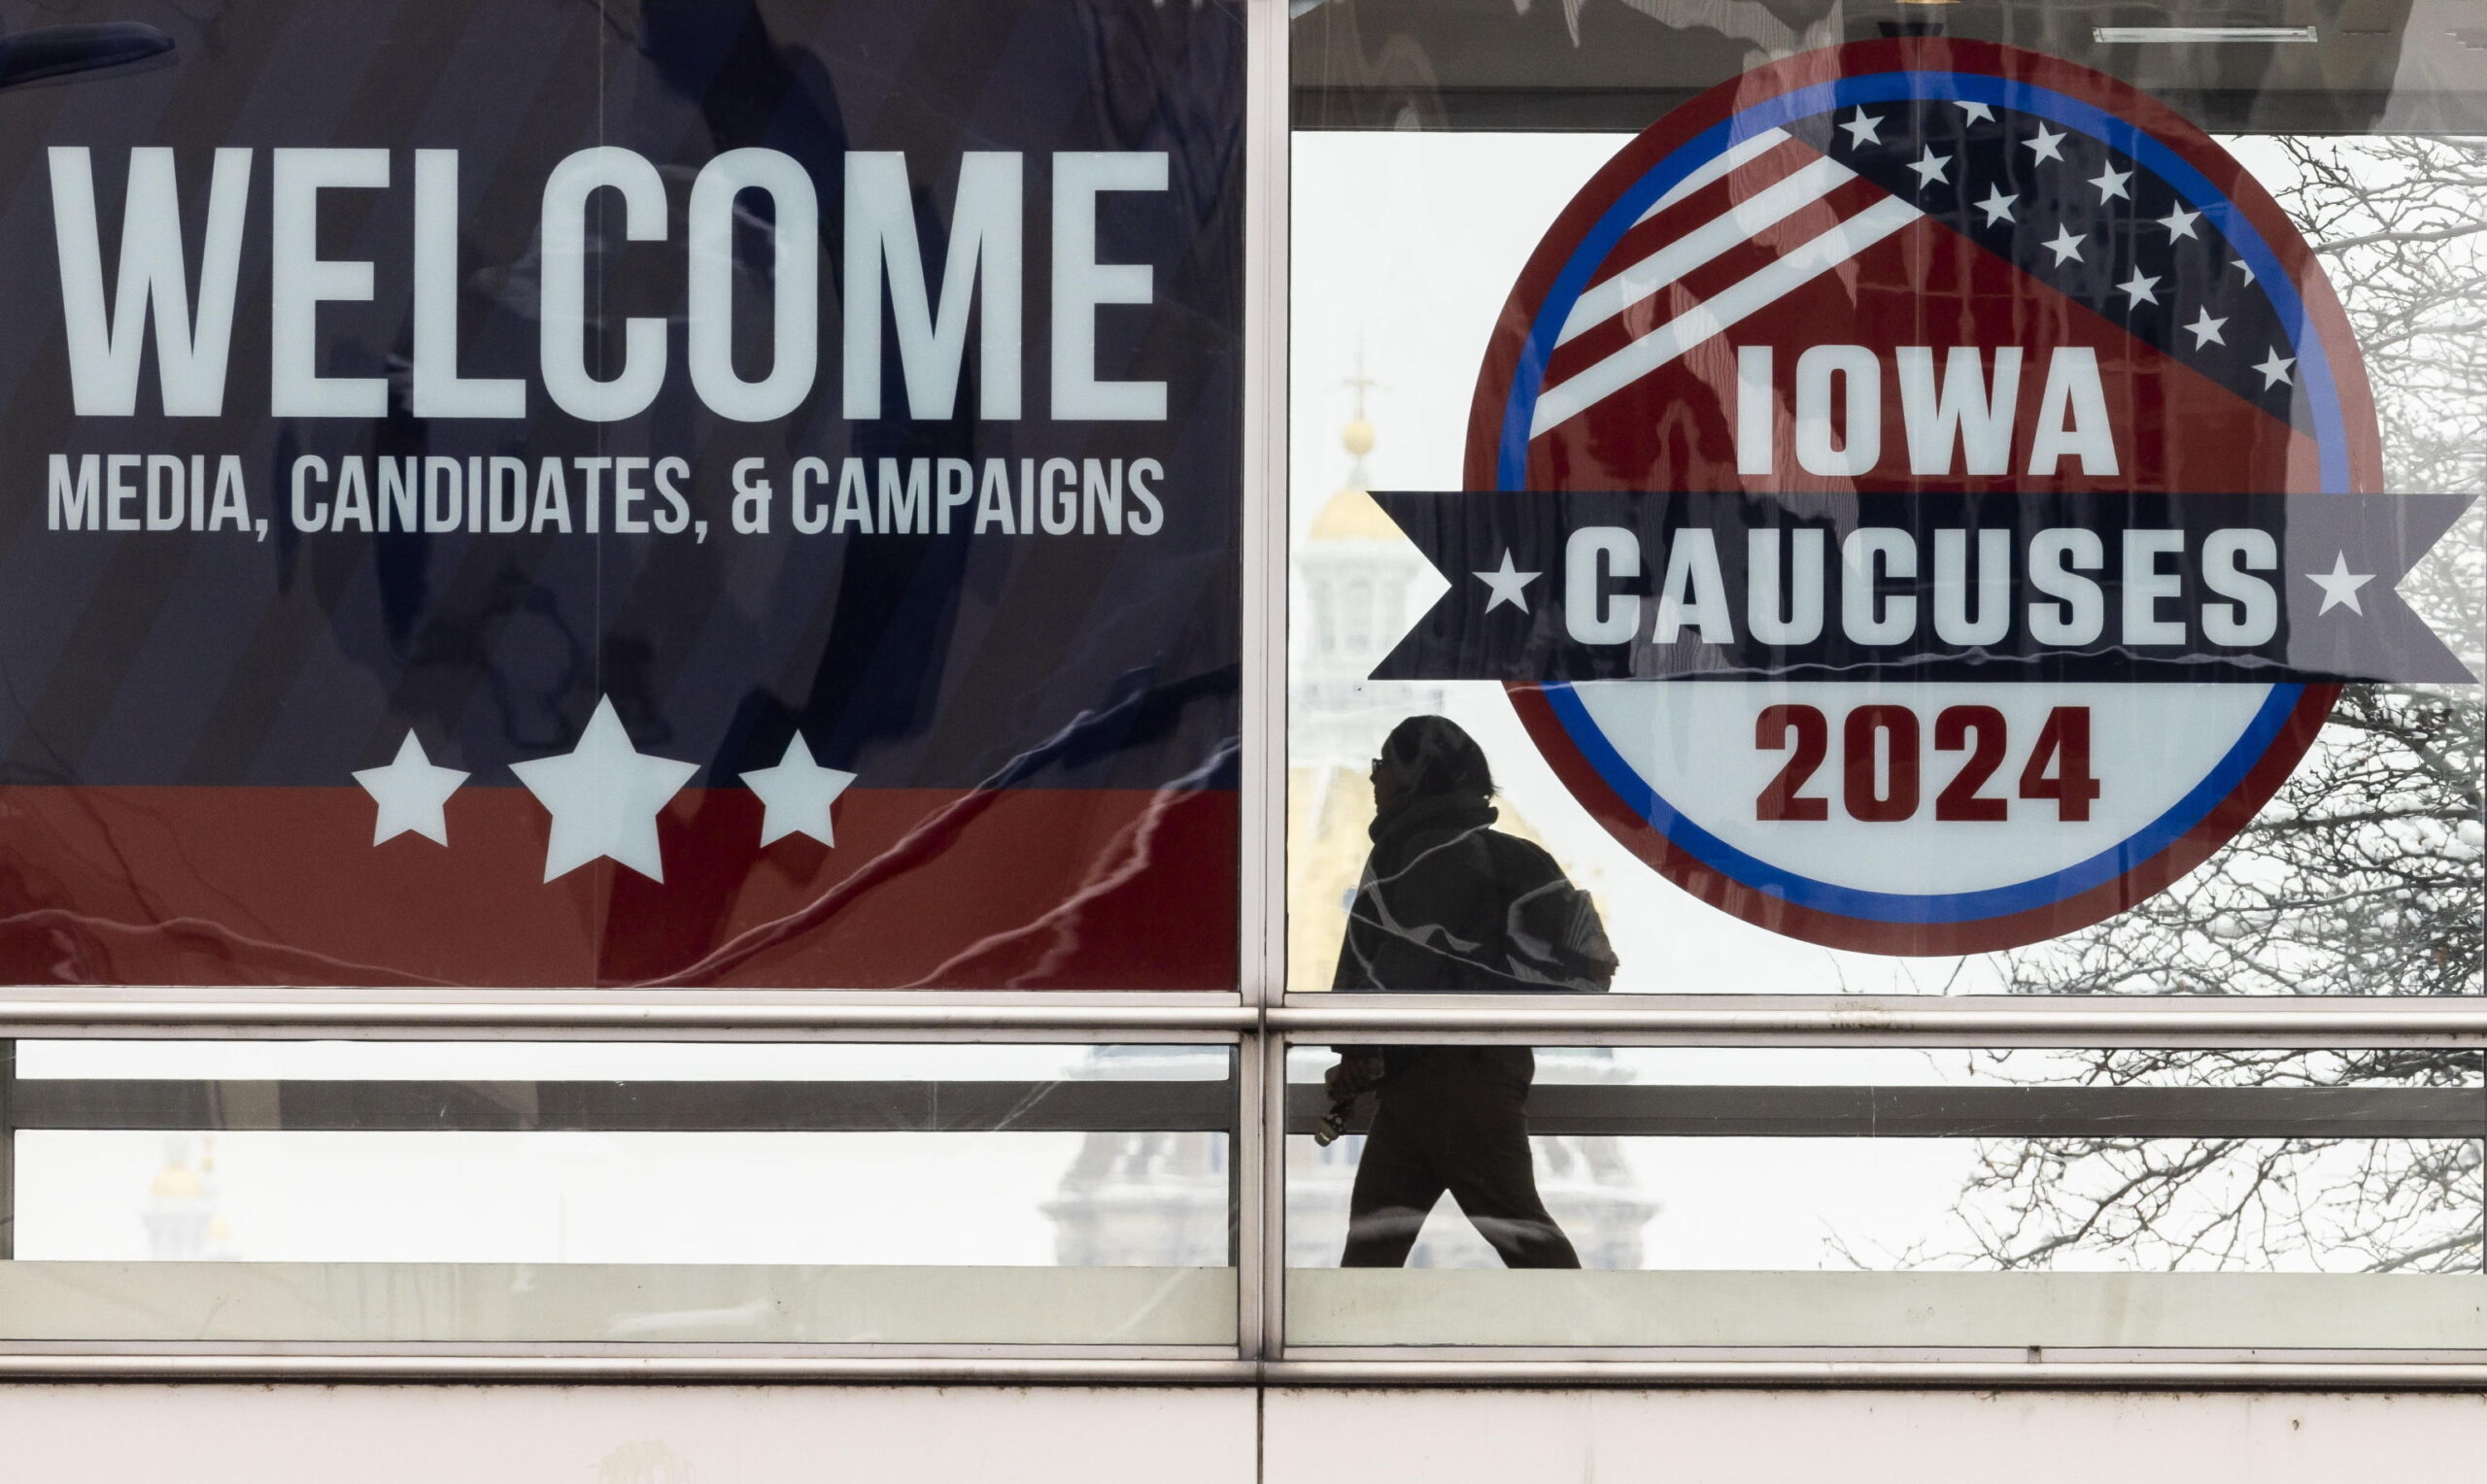 epa11070019 A person walks past an Iowa caucus sign in Des Moines, Iowa, USA, 11 January 2024. Florida Governor Ron DeSantis, former South Carolina Governor Nikki Haley, and former President Donald Trump are campaigning across Iowa in the final days before the state holds its first-in-the-nation caucus on 15 January 2024.  EPA/JUSTIN LANE